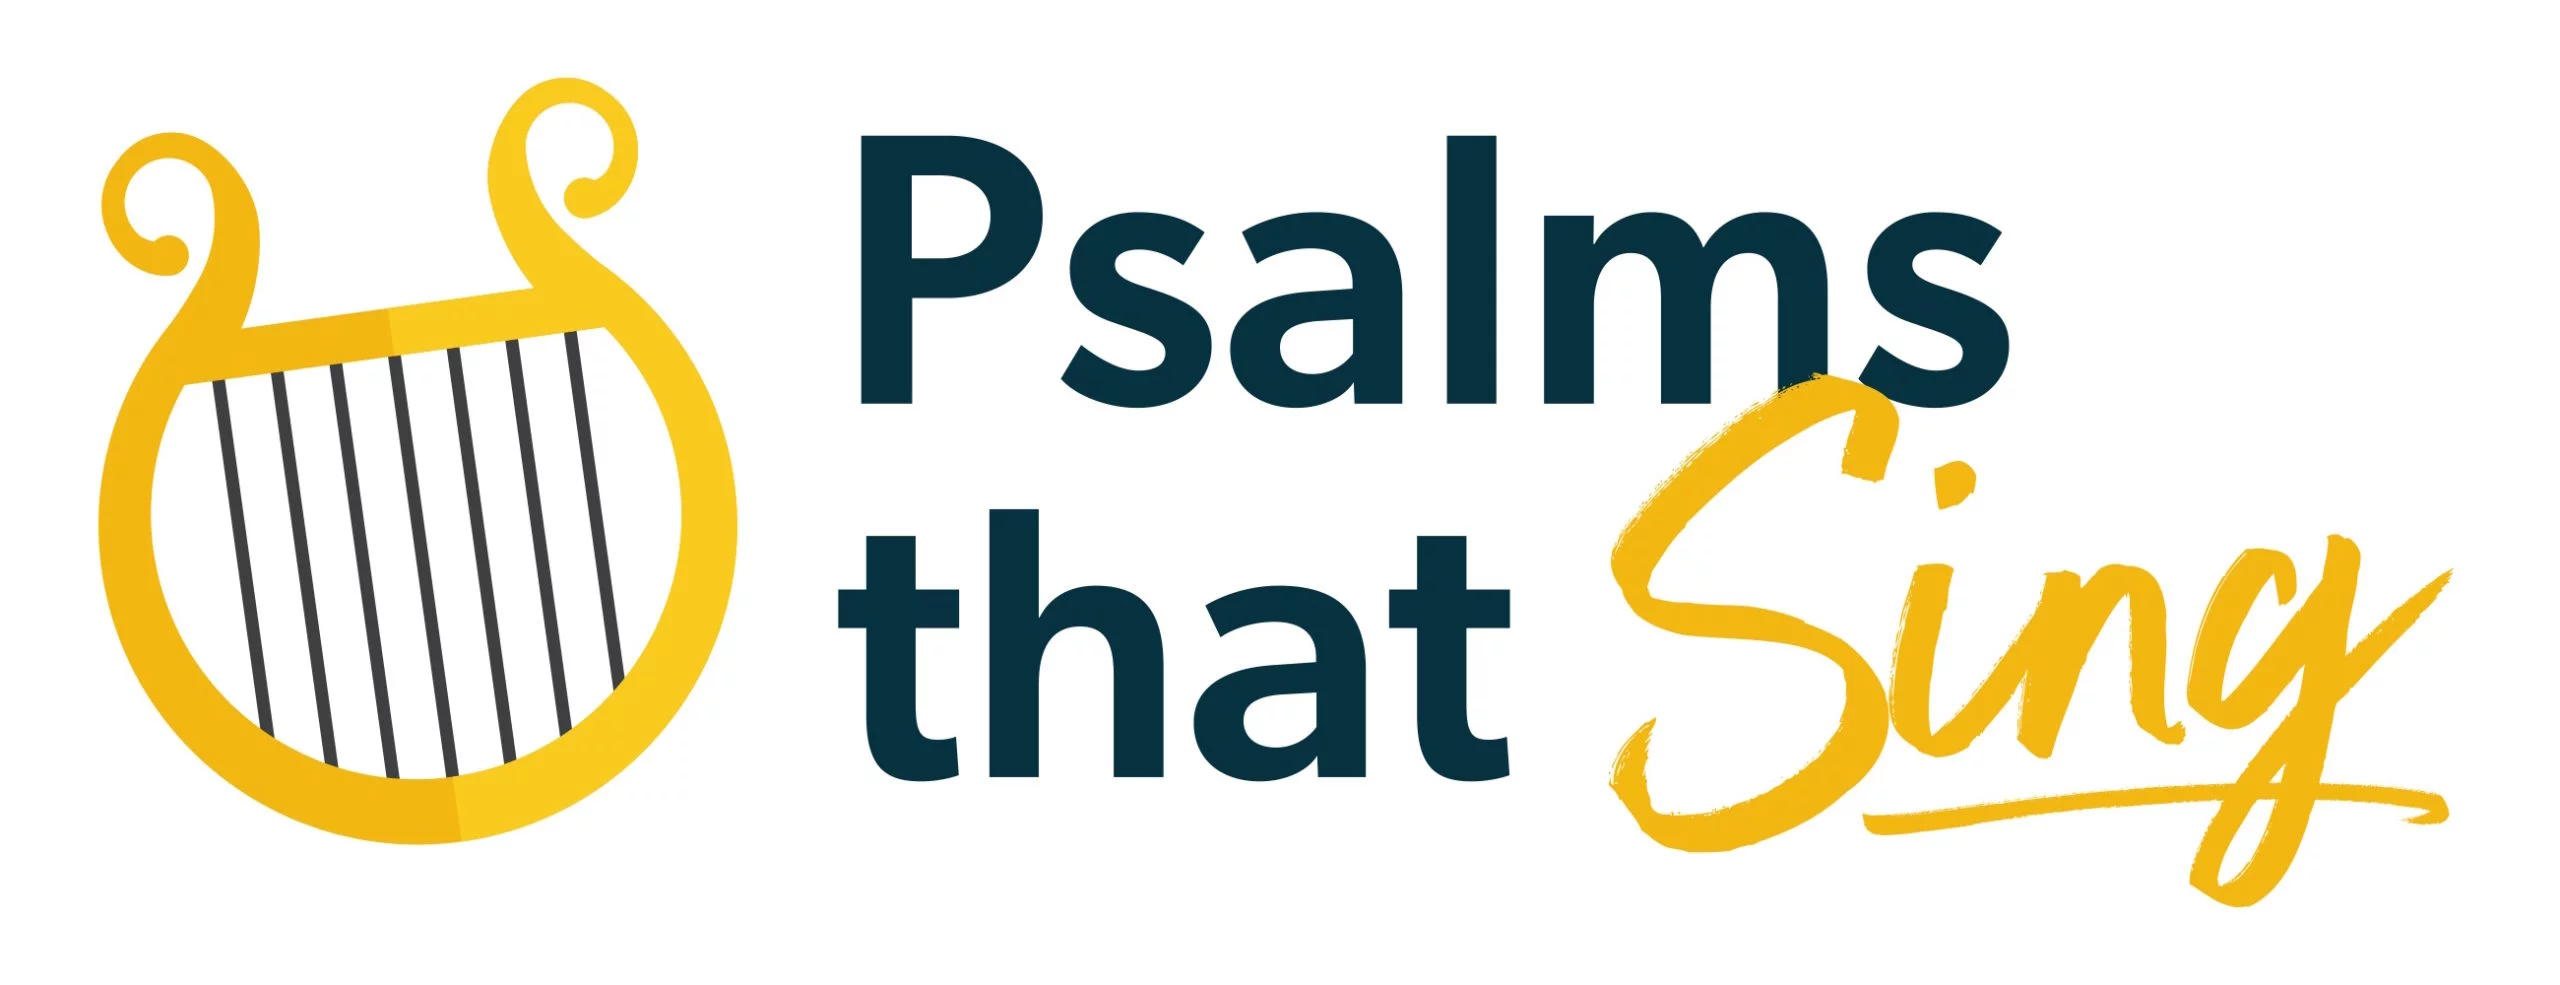 Image of the ‘Psalms that Sing’ logo